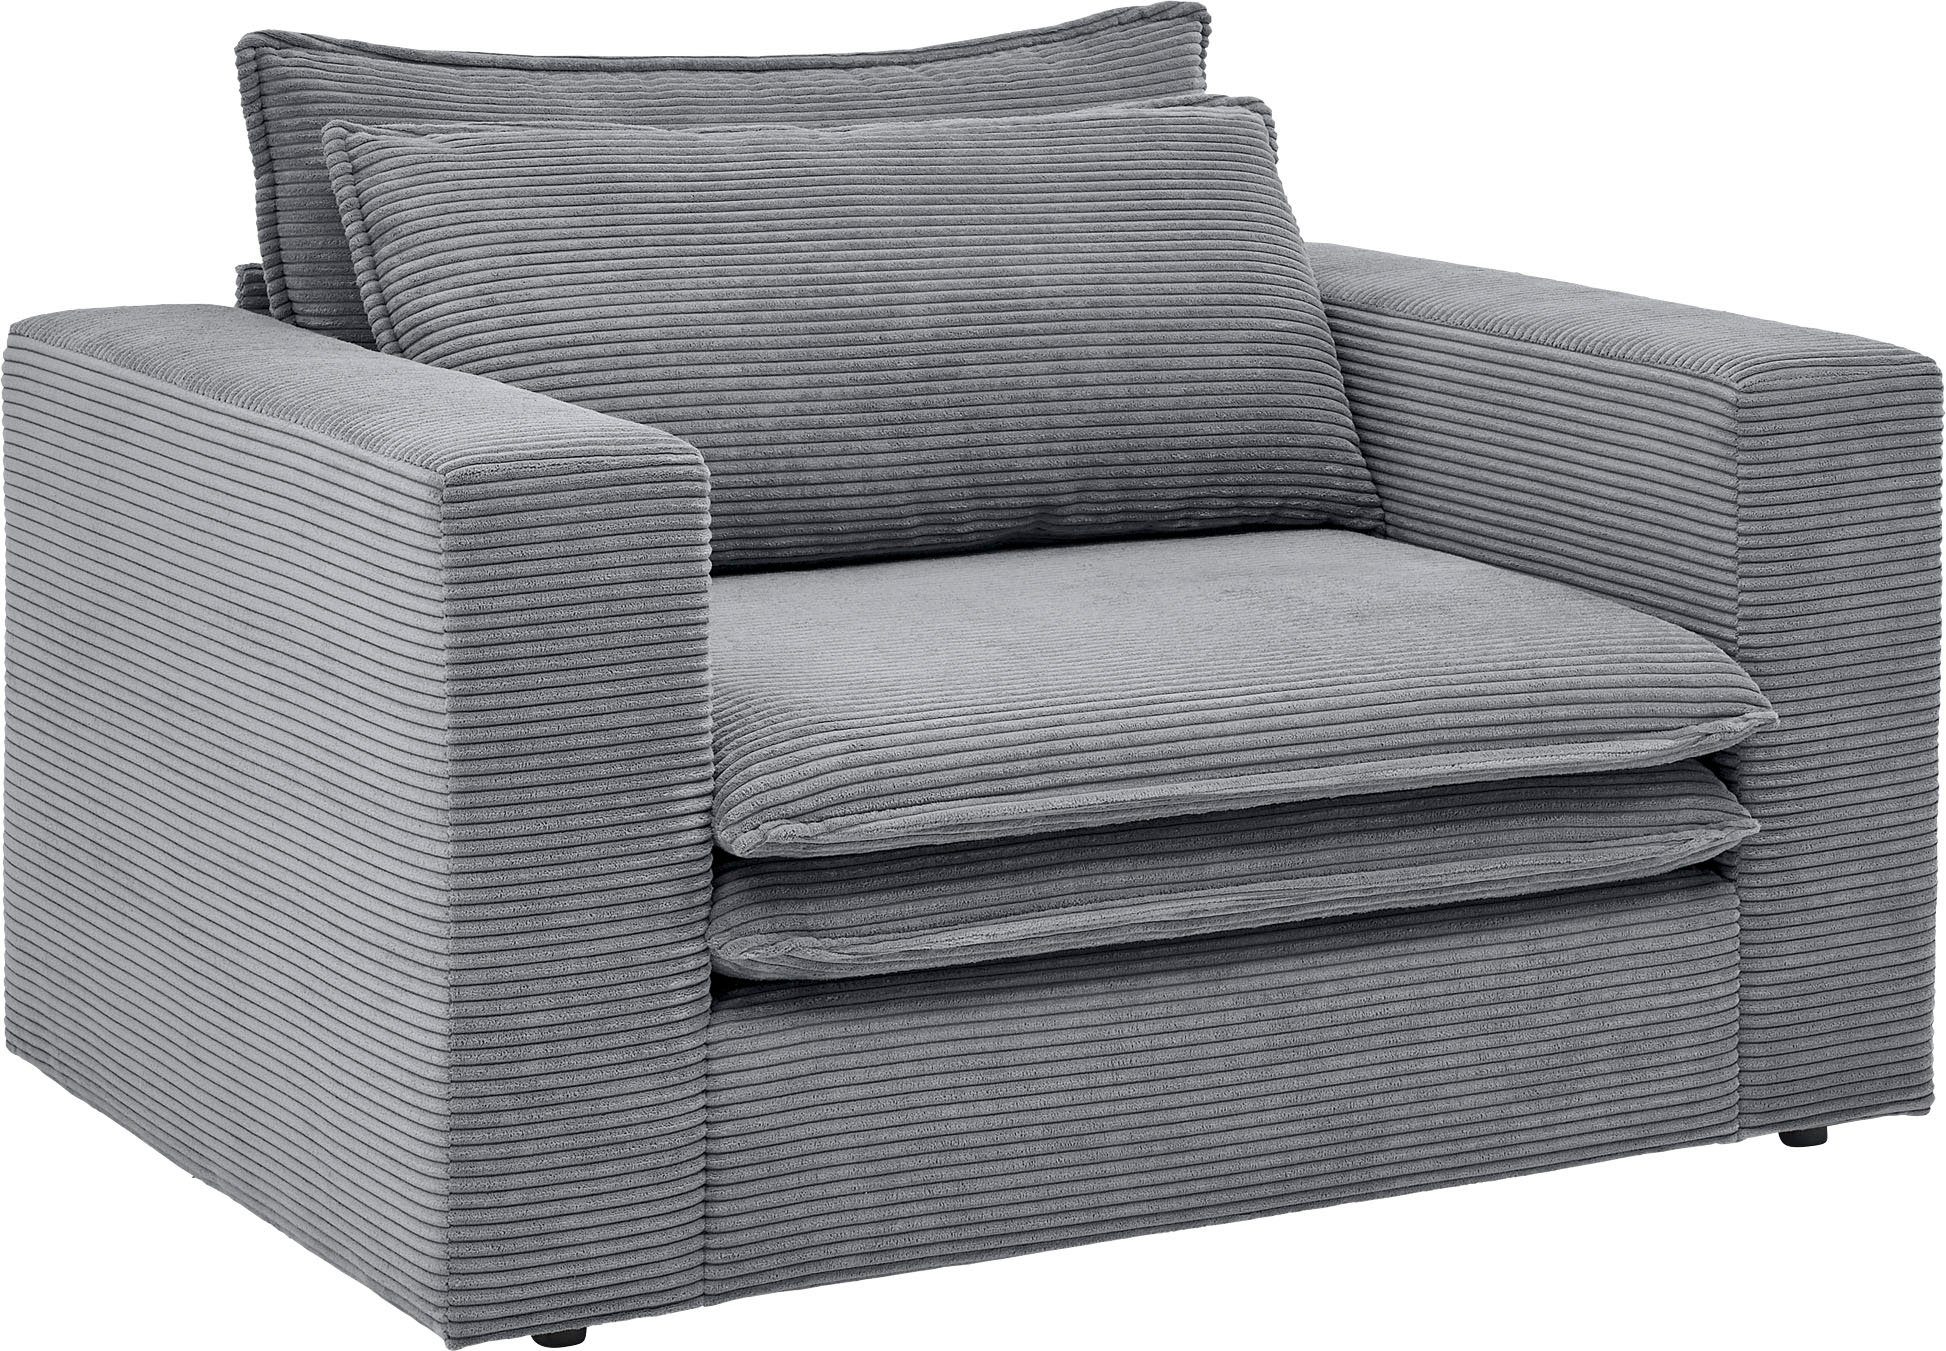 Places of Style Loveseat PIAGGE, Cord, Hochwertiger Loveseat Anthrazit trendiger